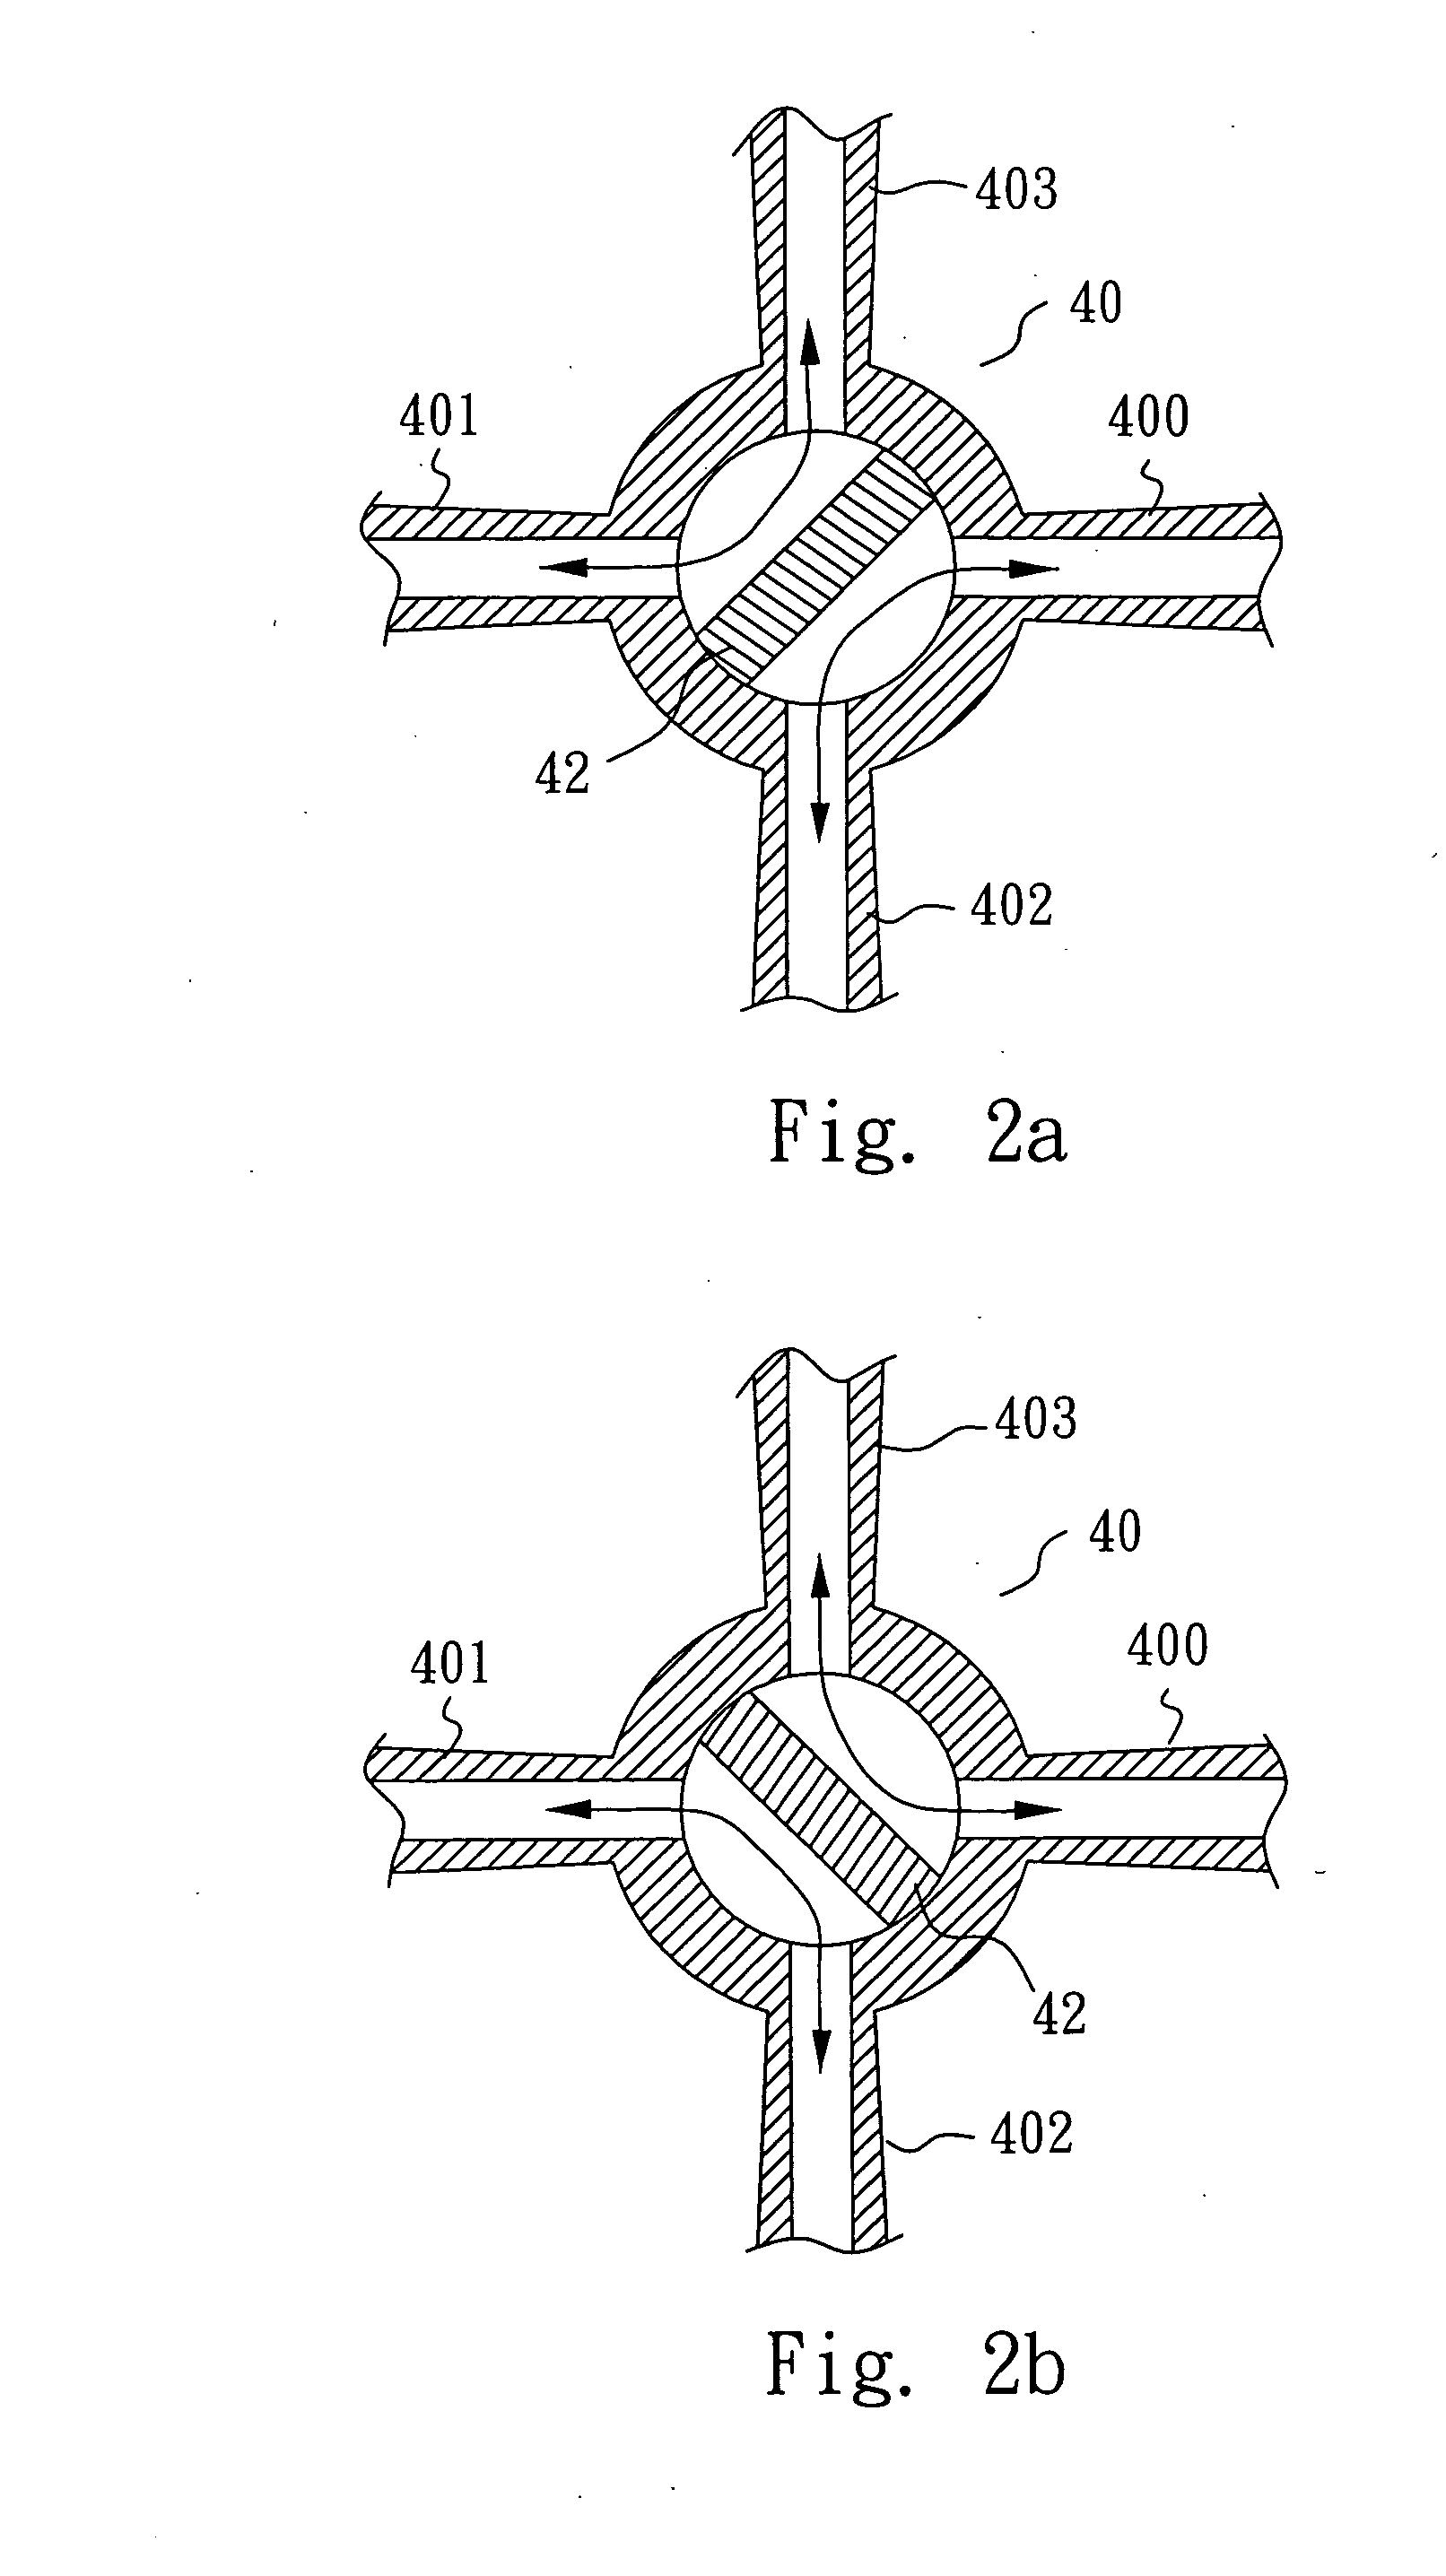 Medical bi-directional in-out switchable irrigation-drainage system for intracranial surgery